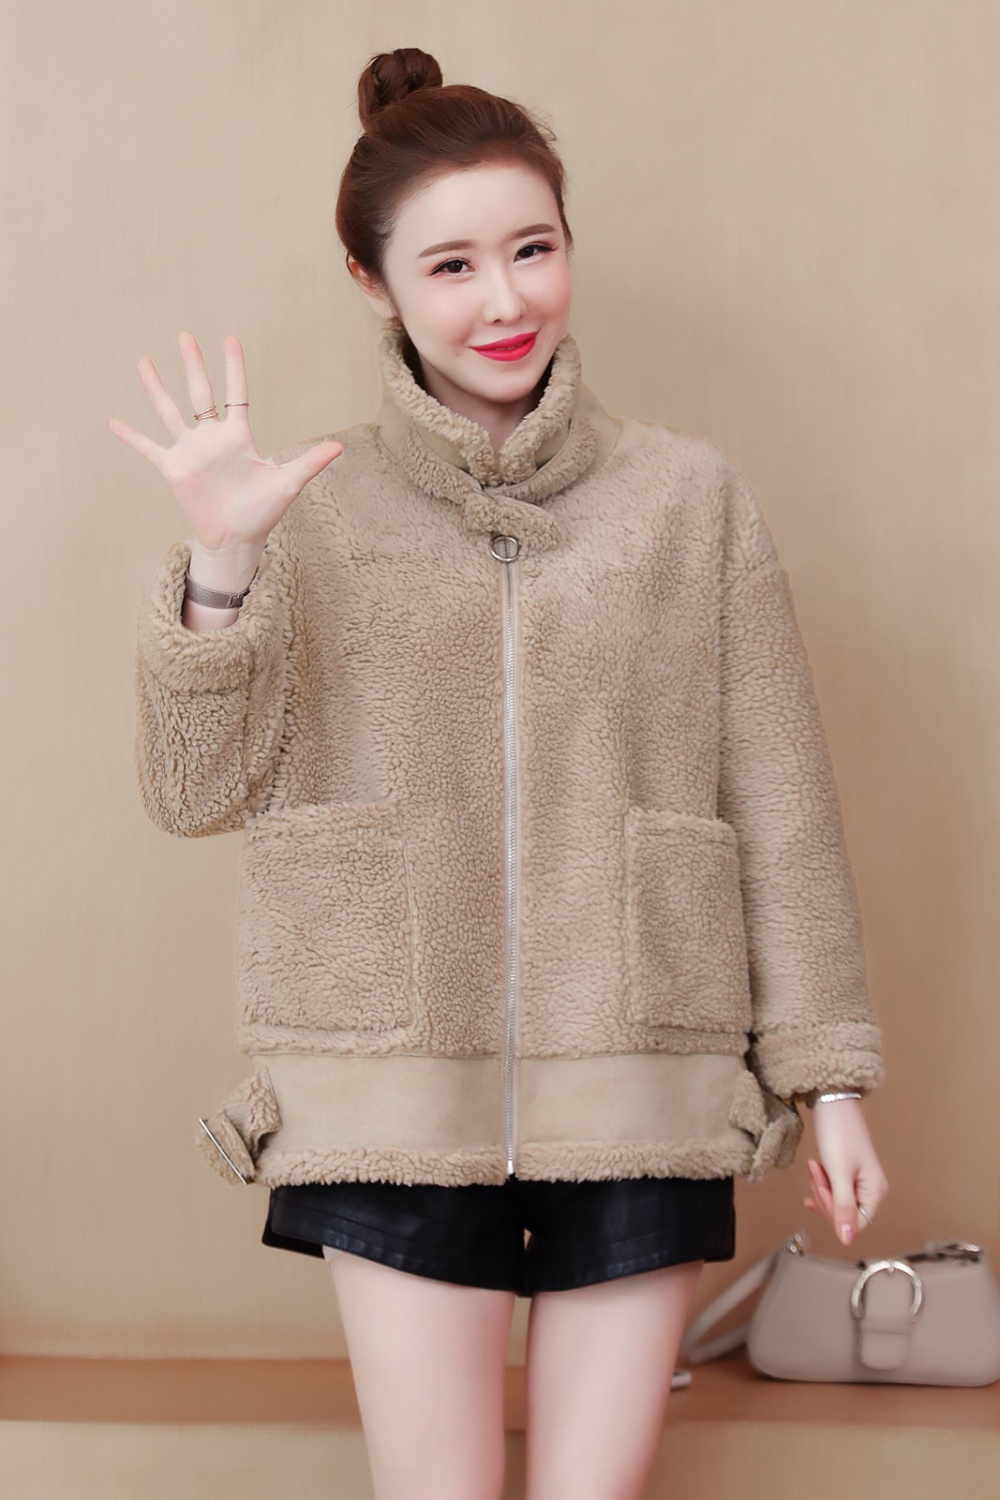 Leather cashmere winter cotton coat loose coat for women